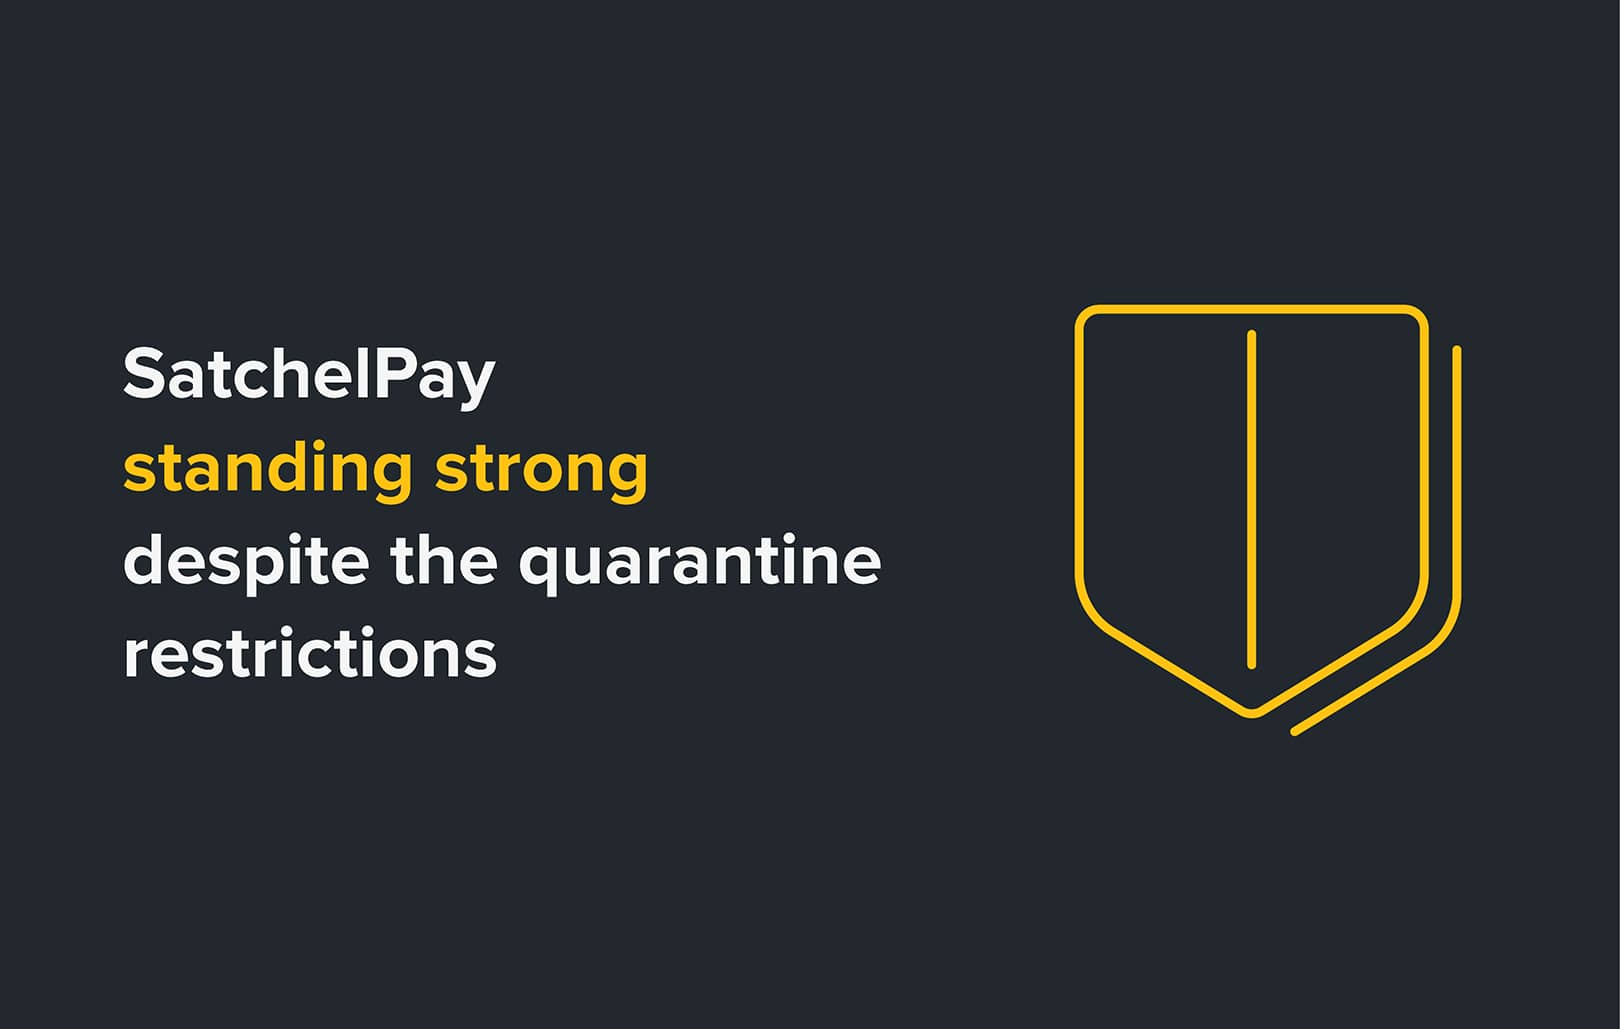 SatchelPay standing strong despite the quarantine restrictions